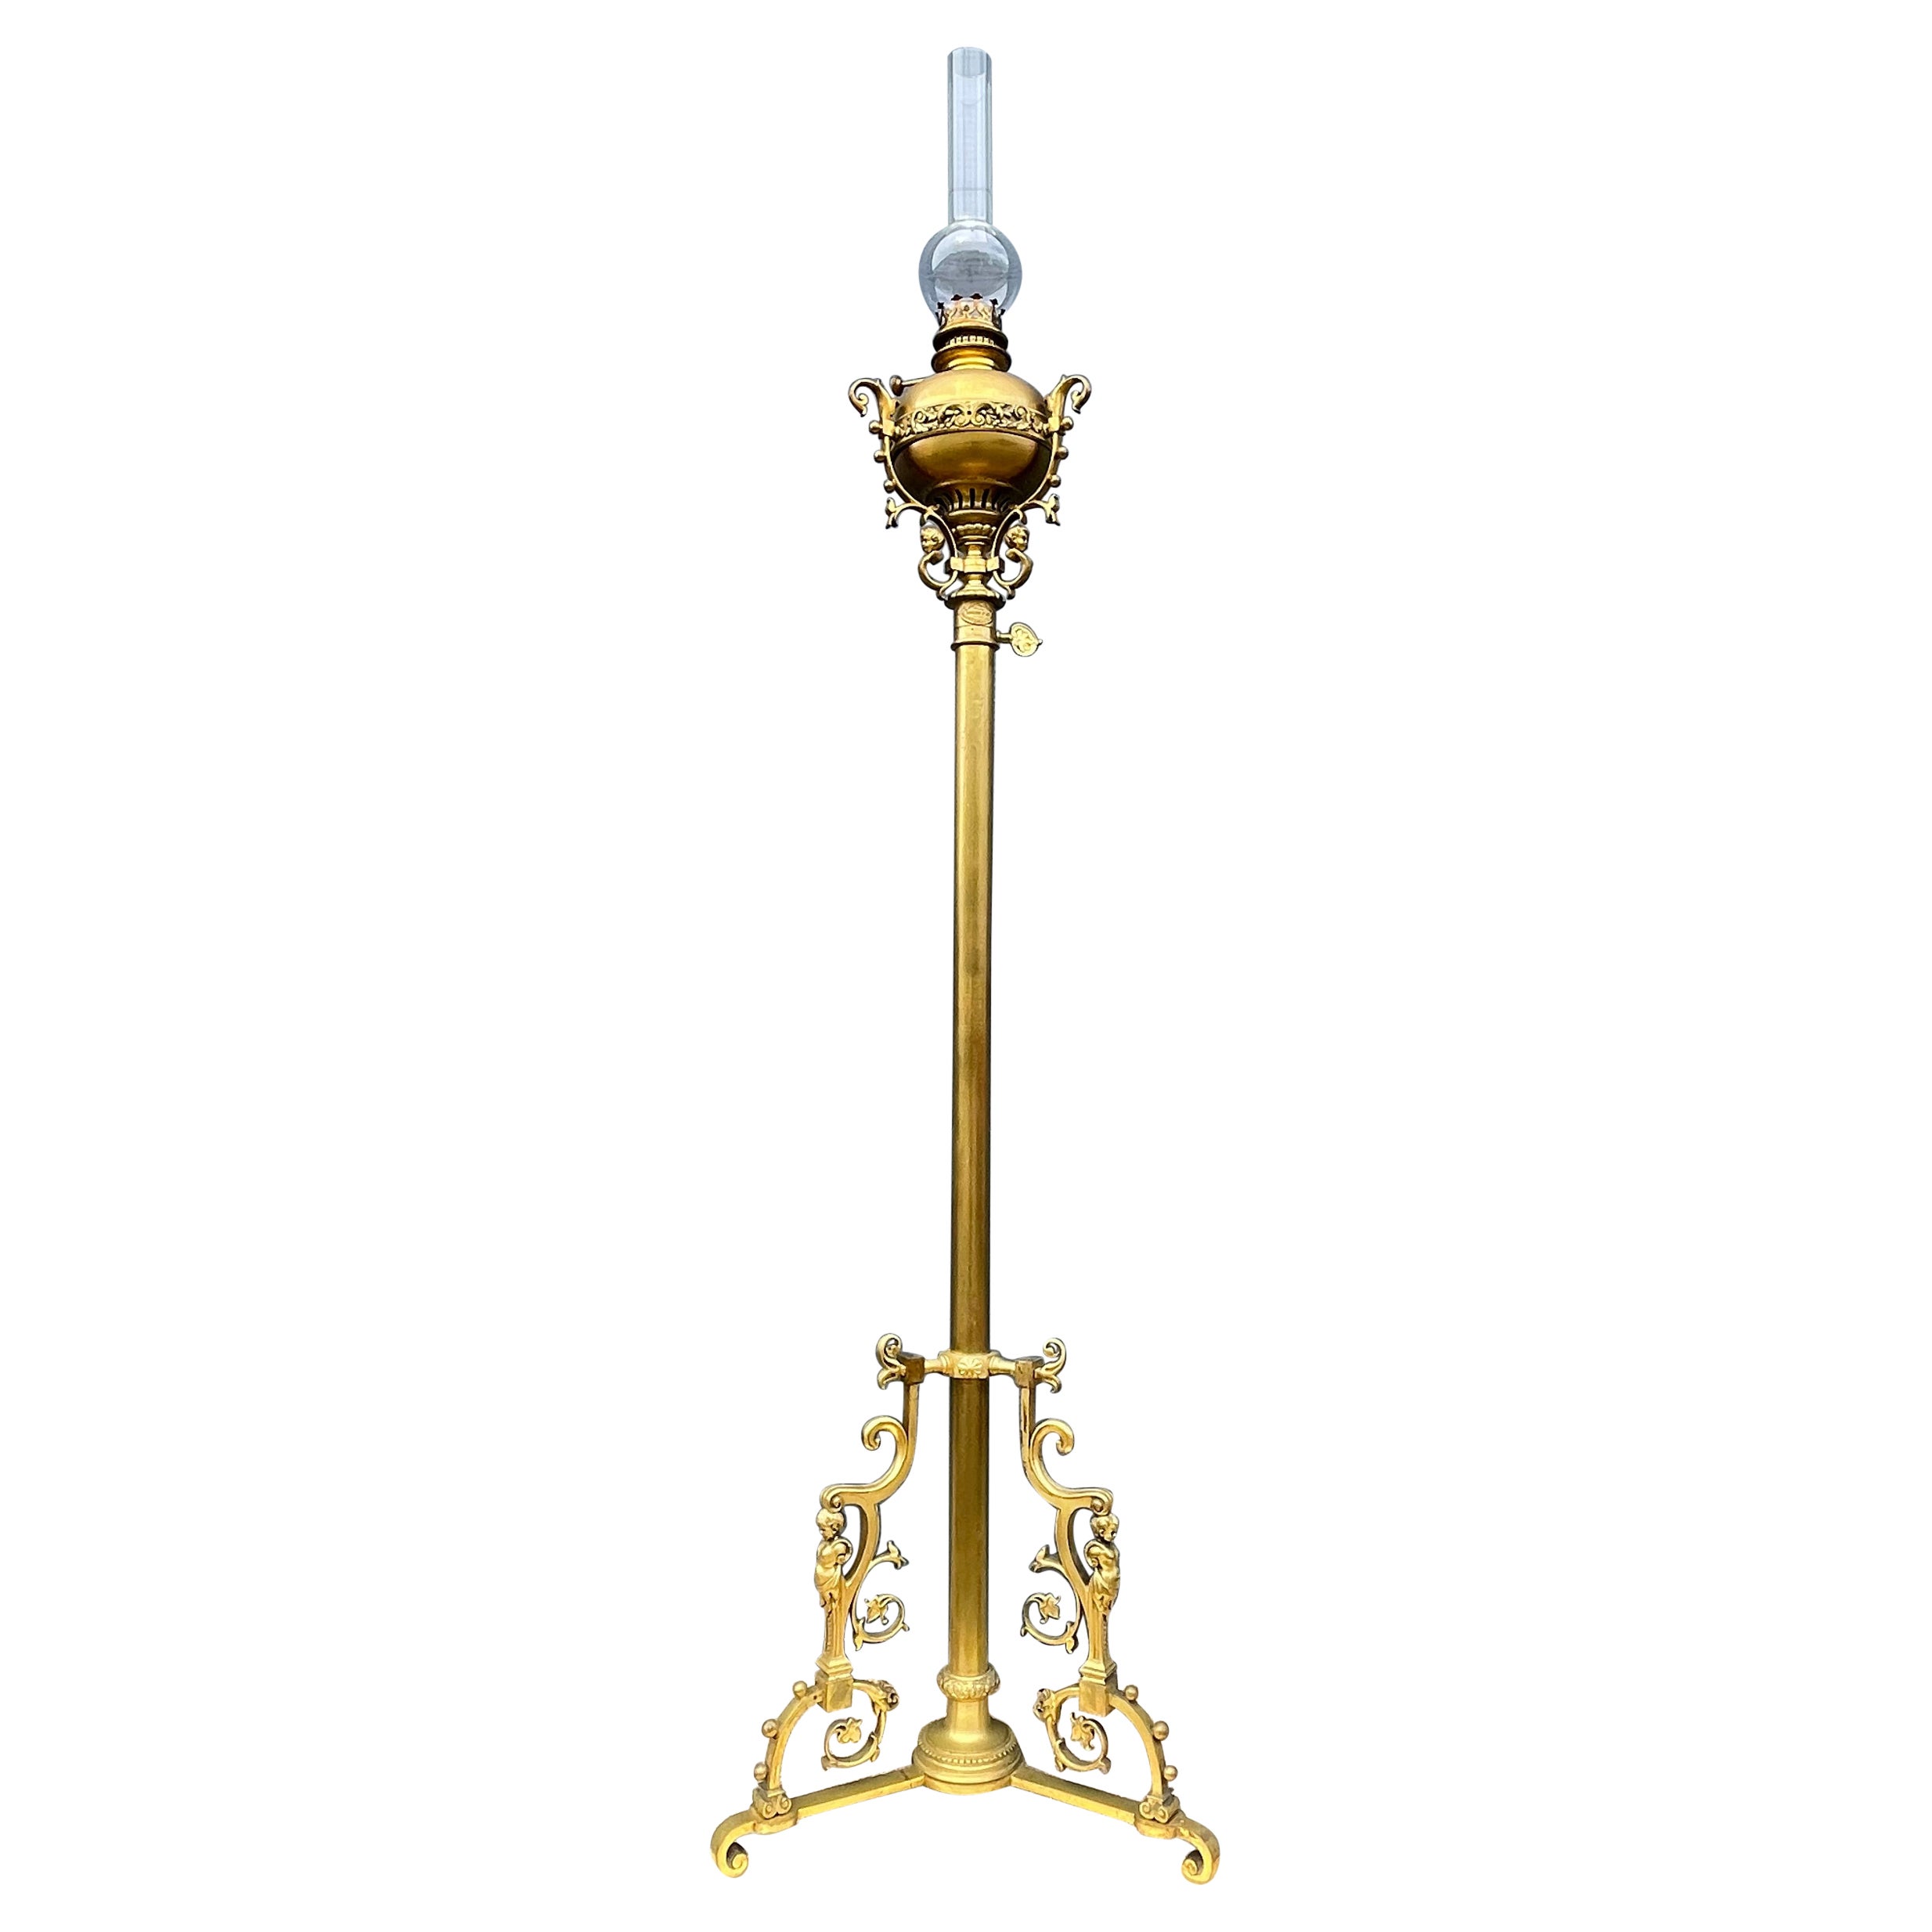 Stunning 19th Century Empire Revival Bronze & Glass Oil Floor Lamp By H. Luppens For Sale